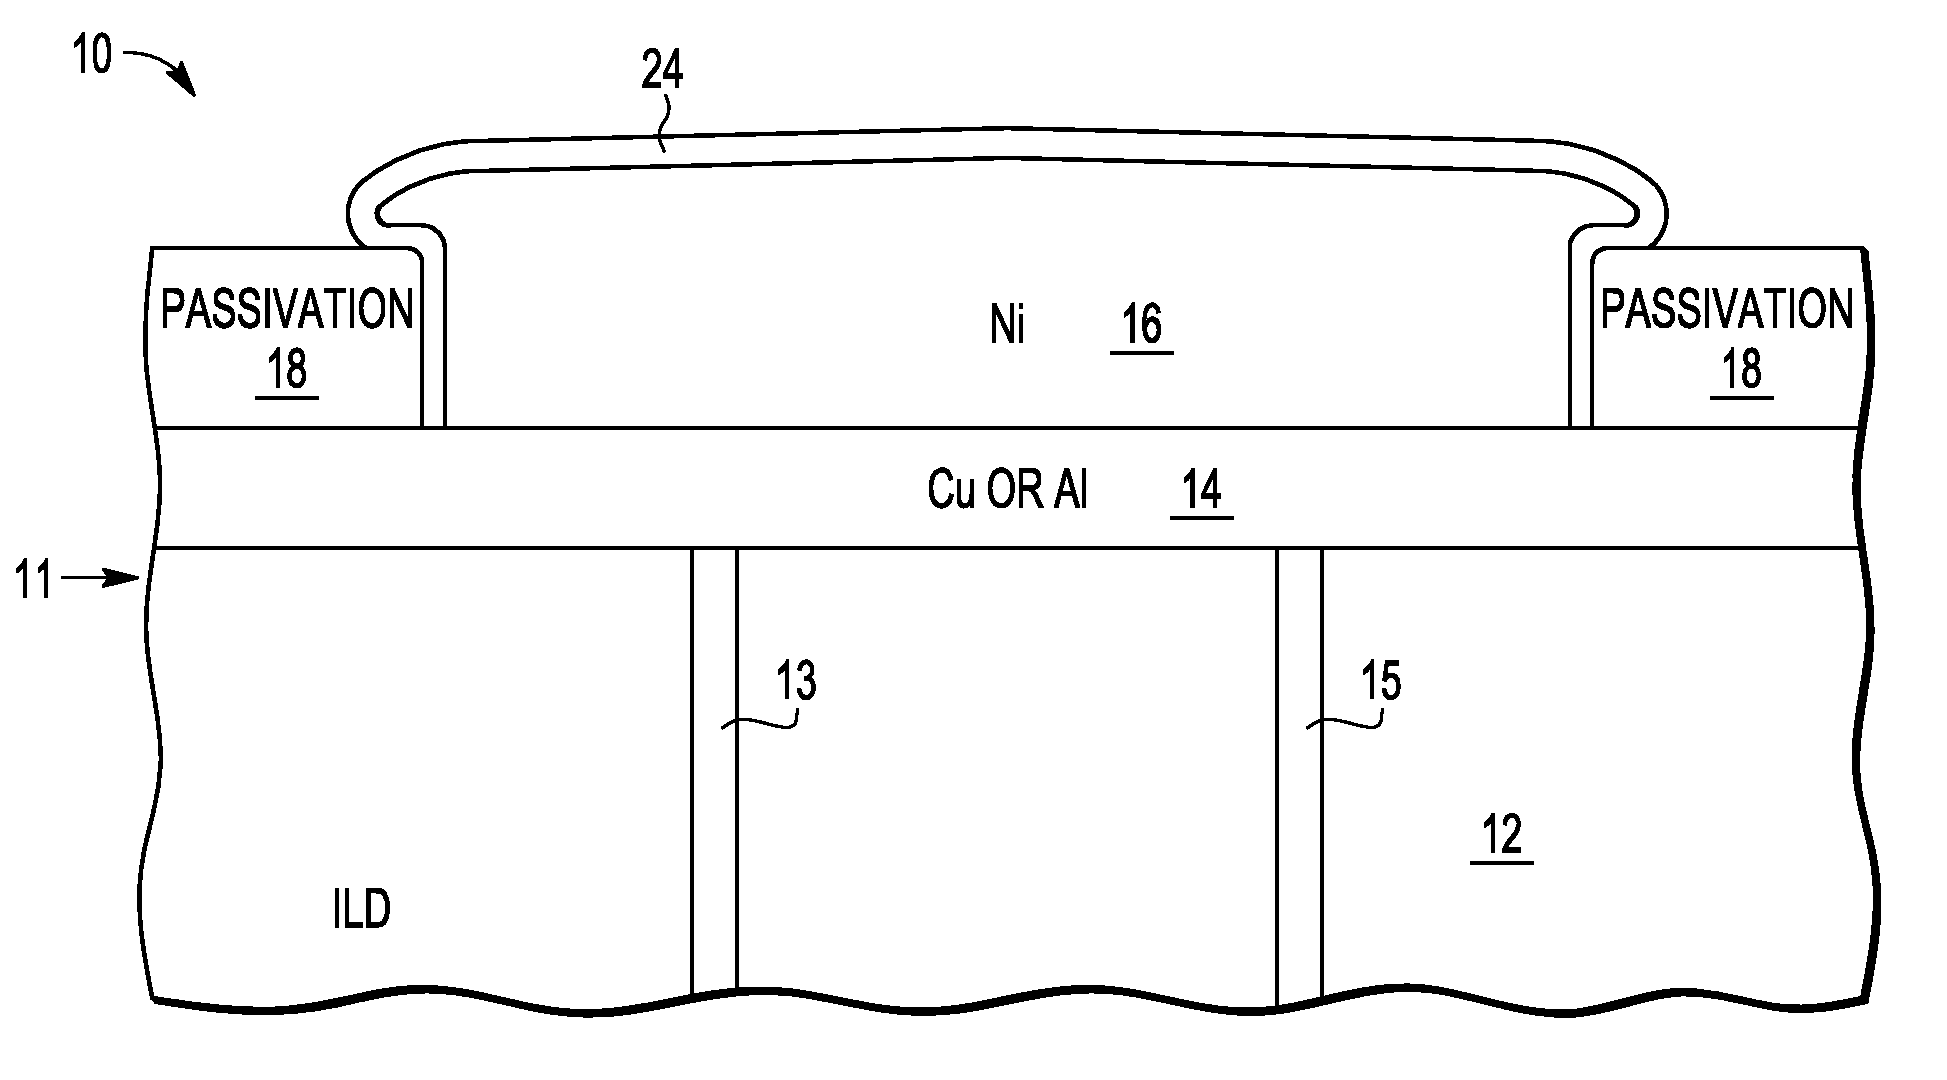 Method of improving adhesion of bond pad over pad metallization with a neighboring passivation layer by depositing a palladium layer